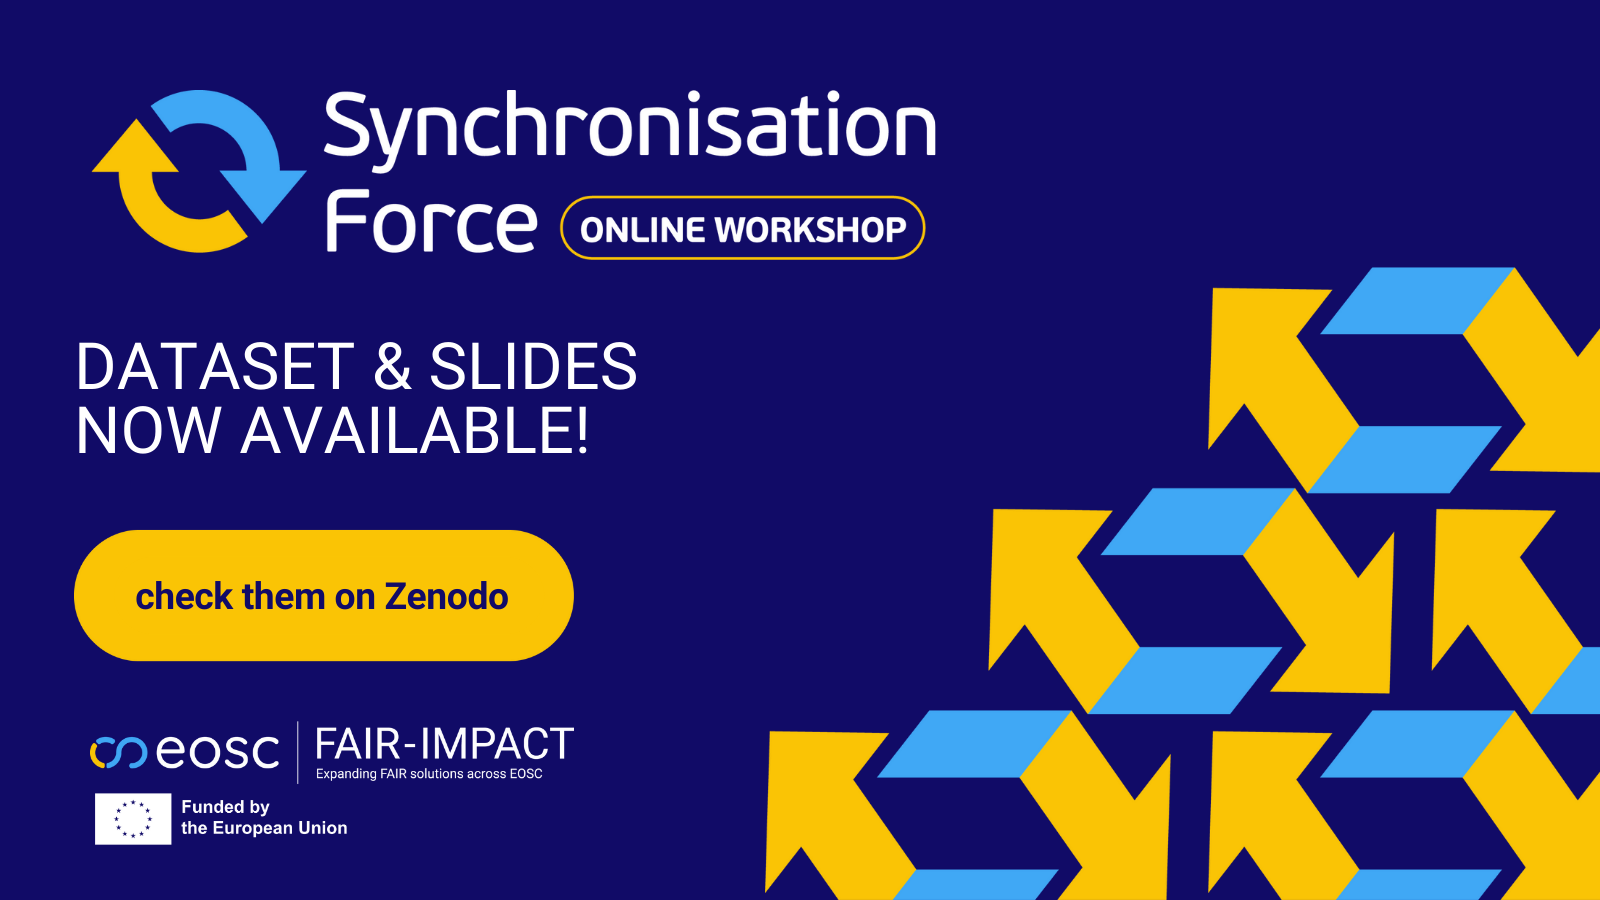 Synchronisation Force Workshop 2022: datasets and slides now available